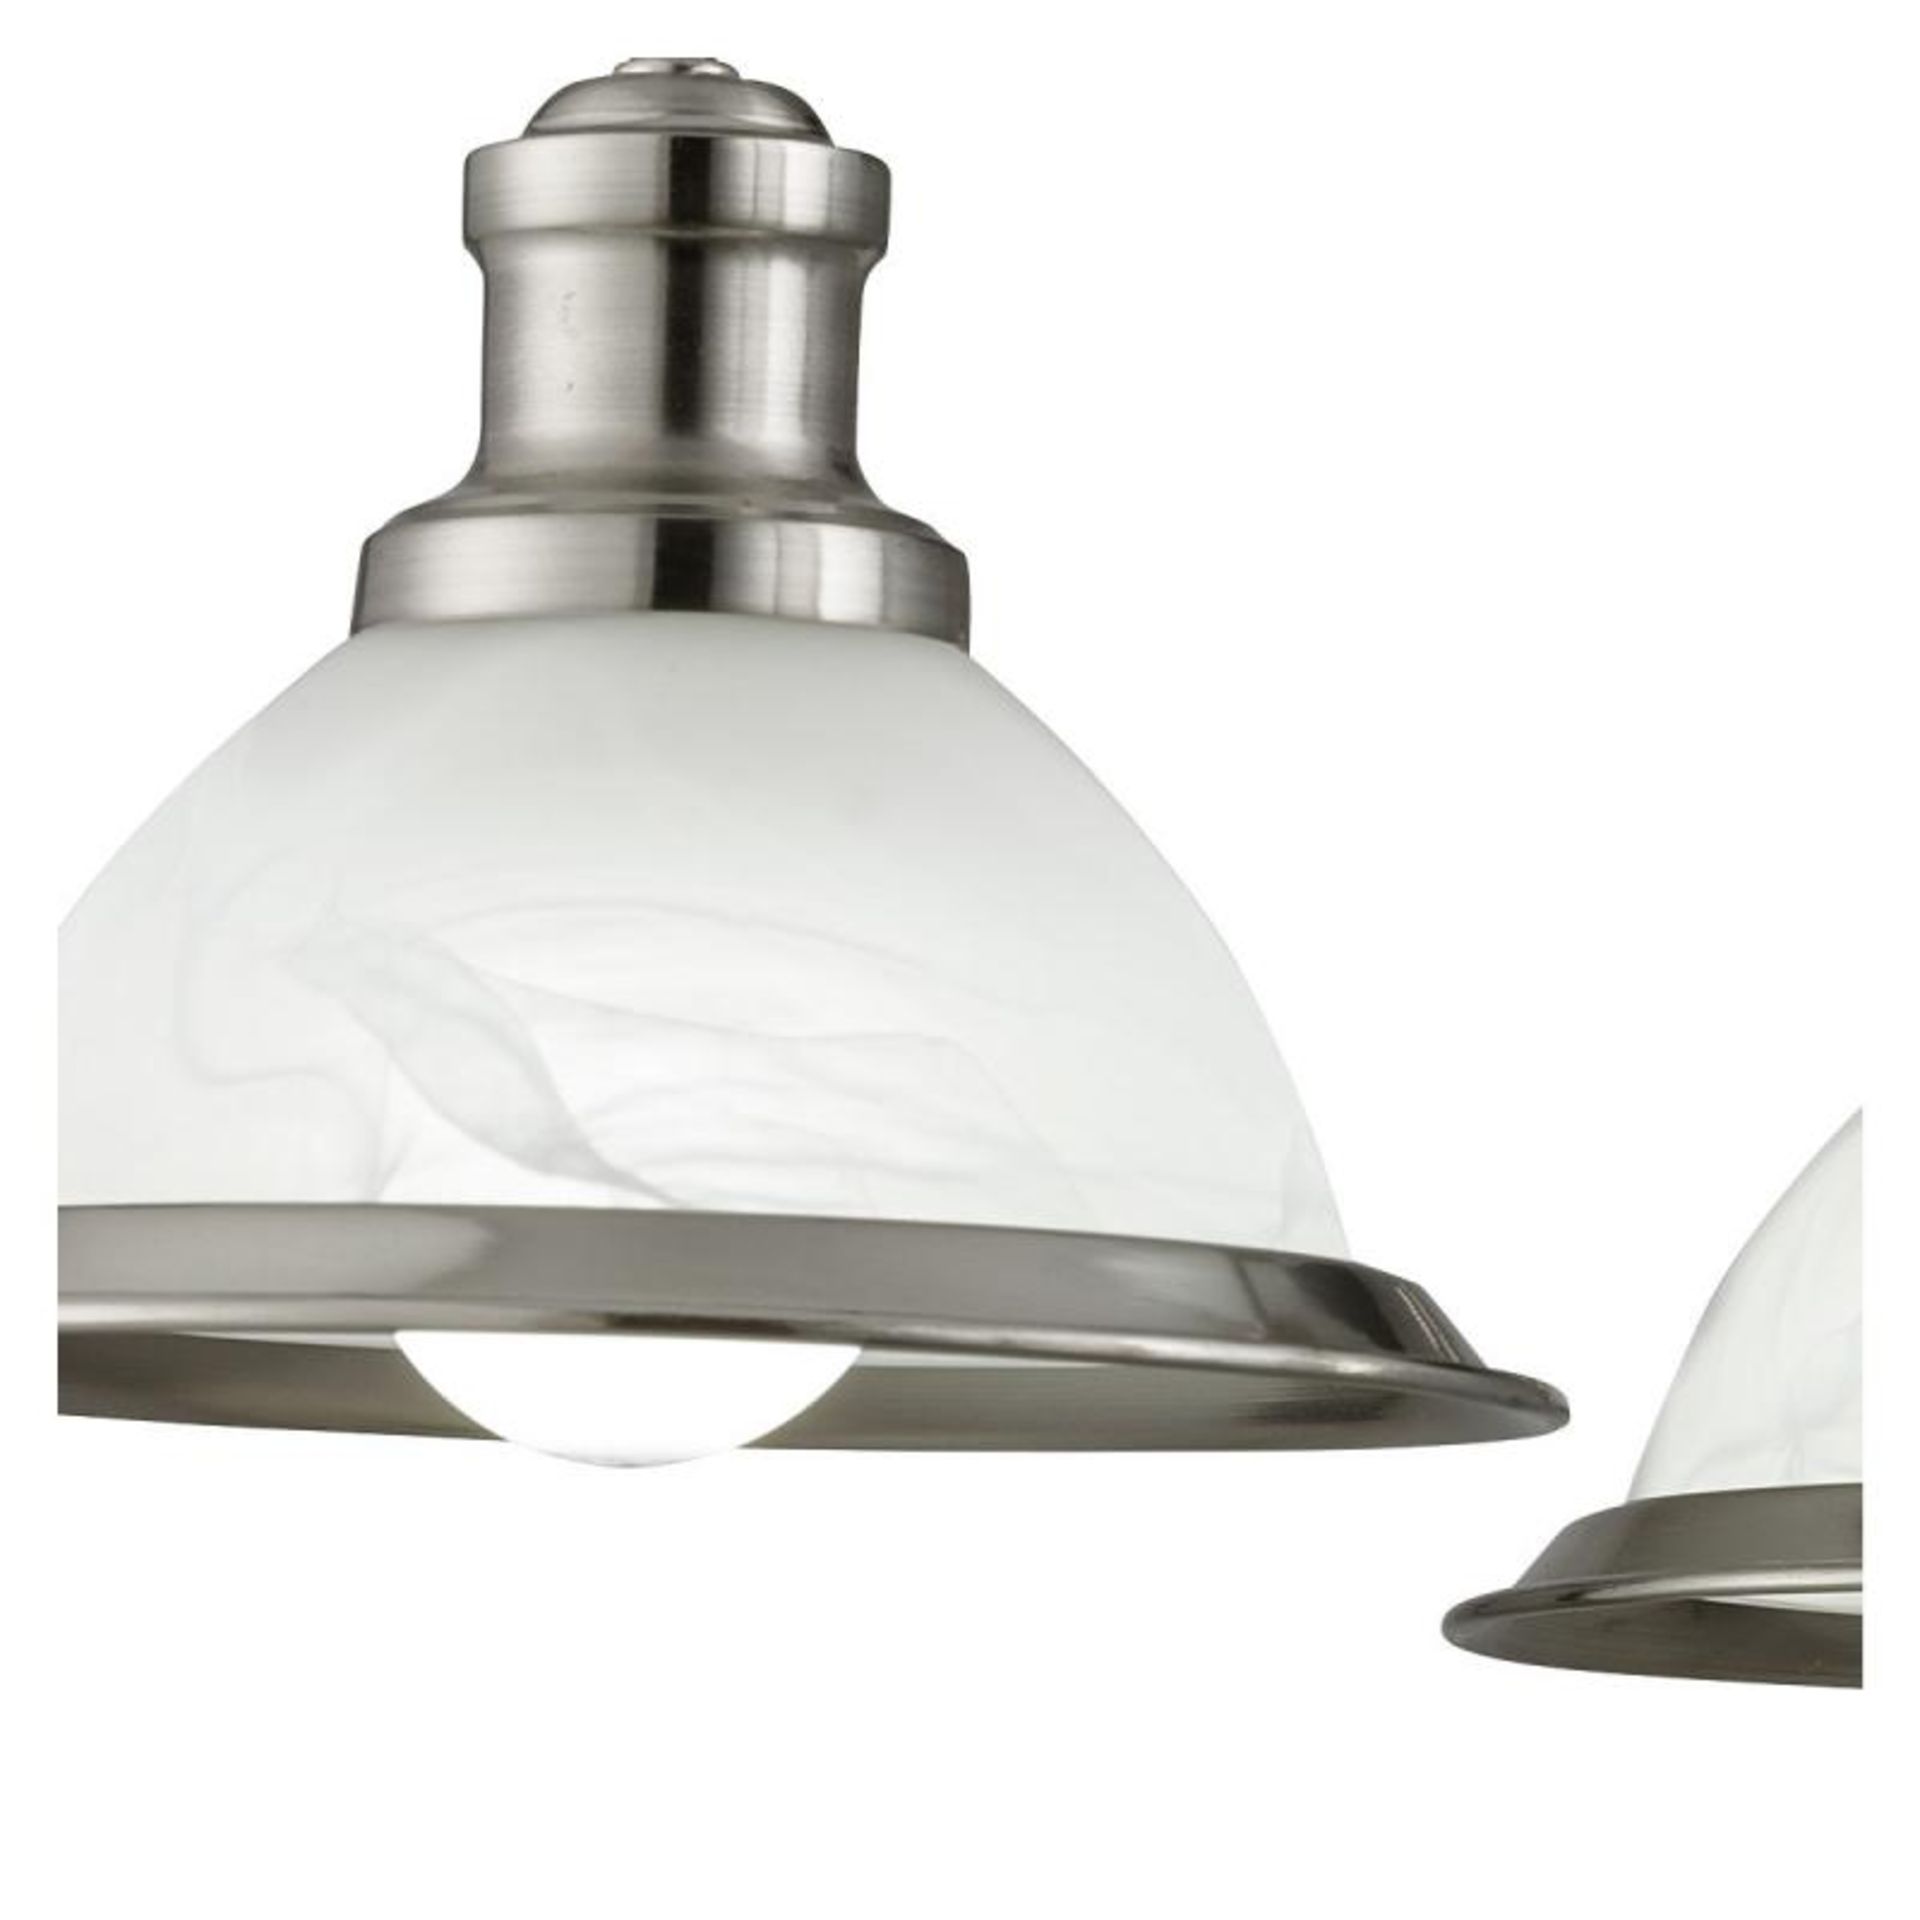 1 x Bistro Satin Silver 3 Light Ceiling Fitting With Marble Glass Shades - New Boxed Stock - CL323 - - Image 2 of 3